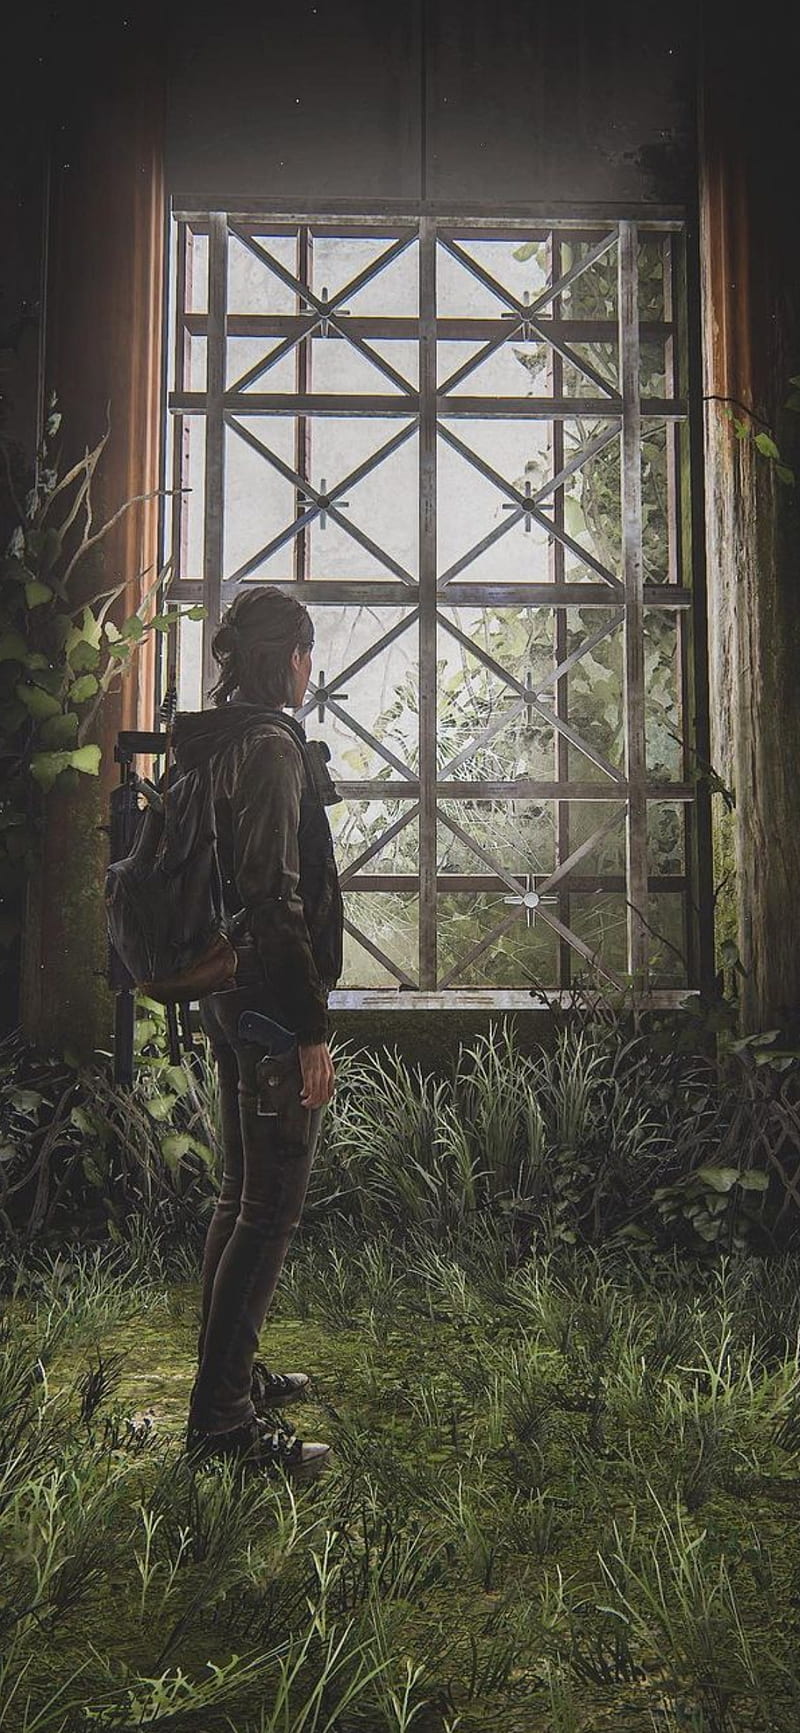 The Last of us 2, ellie, games, last of us, playstation, ps4, ps5